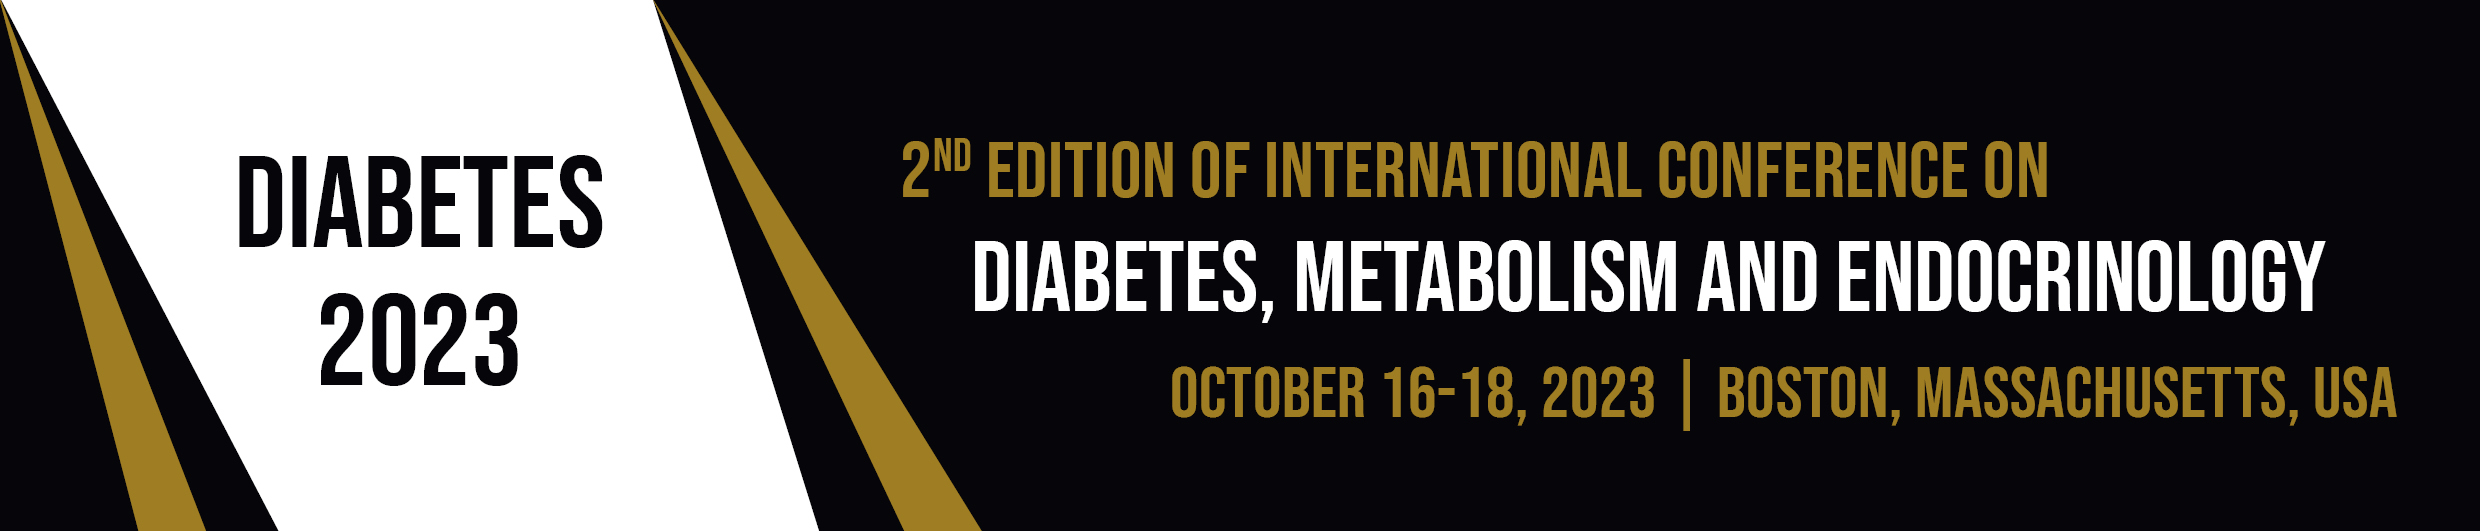 2nd Edition of International Conference on Diabetes, Metabolism and Endocrinology, Online Event